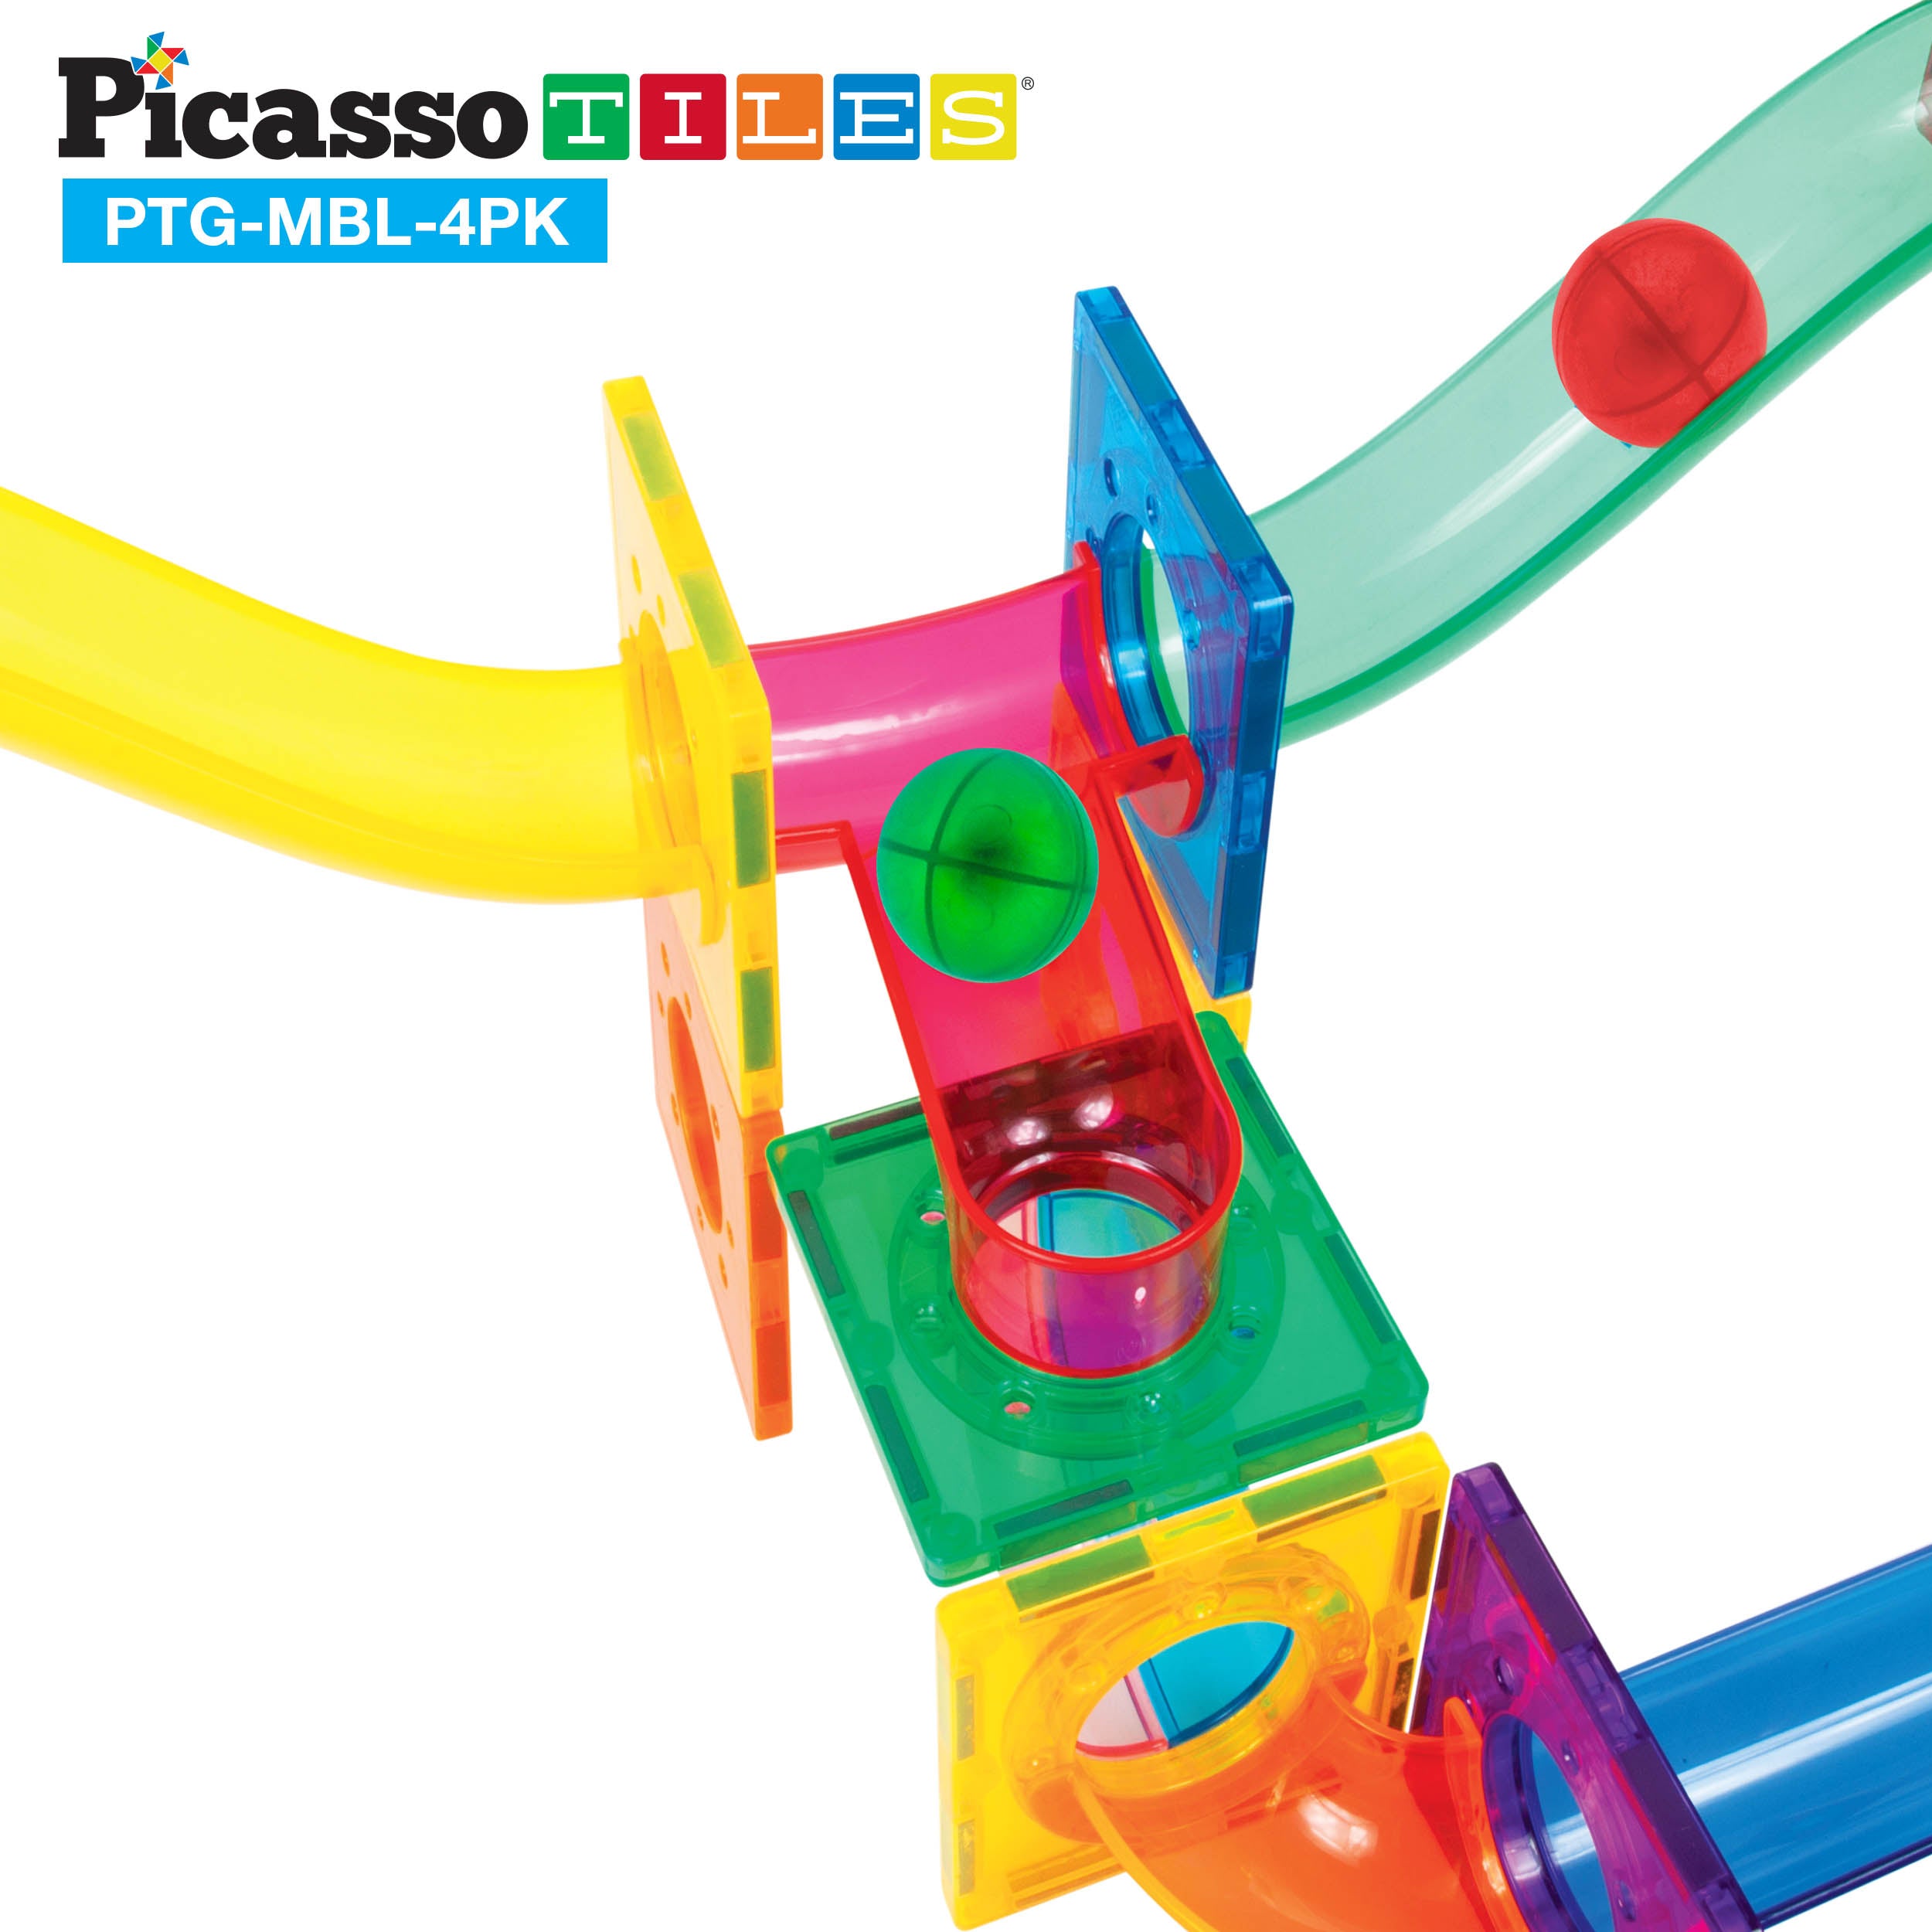 PicassoTiles 8pc Marbles for Track Run Building Blocks